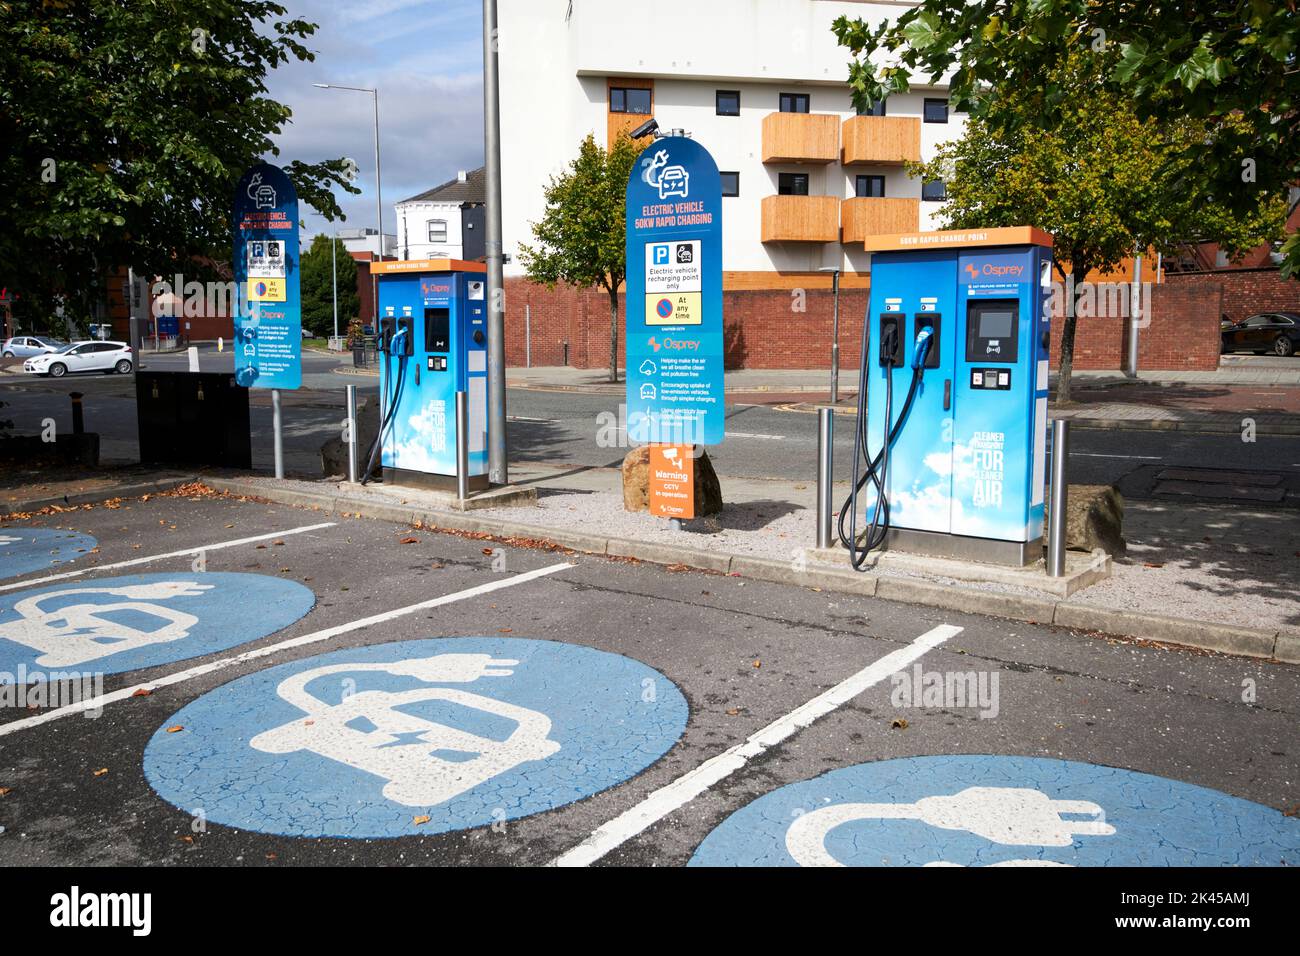 osprey 50kw rapid charge electric vehicle recharge point in st helens england uk Stock Photo